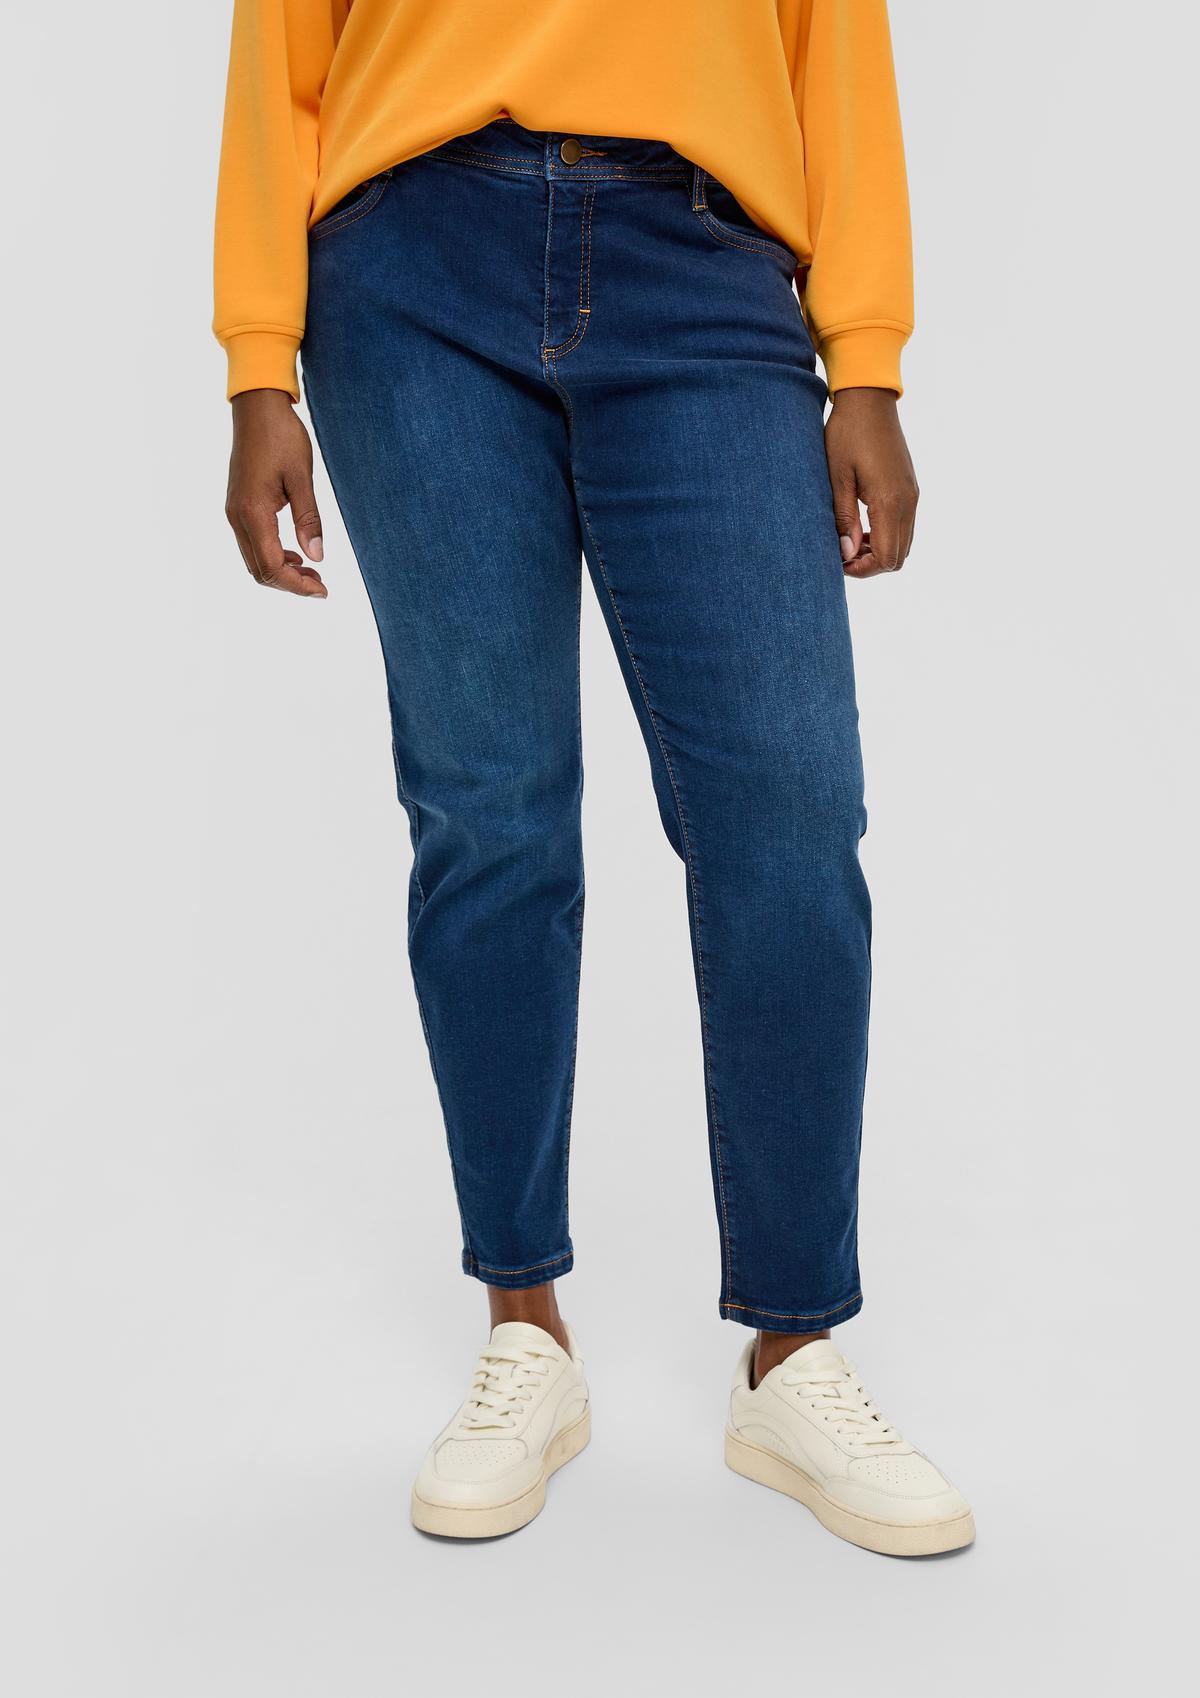 Jeans / relaxed fit / mid rise / slim leg